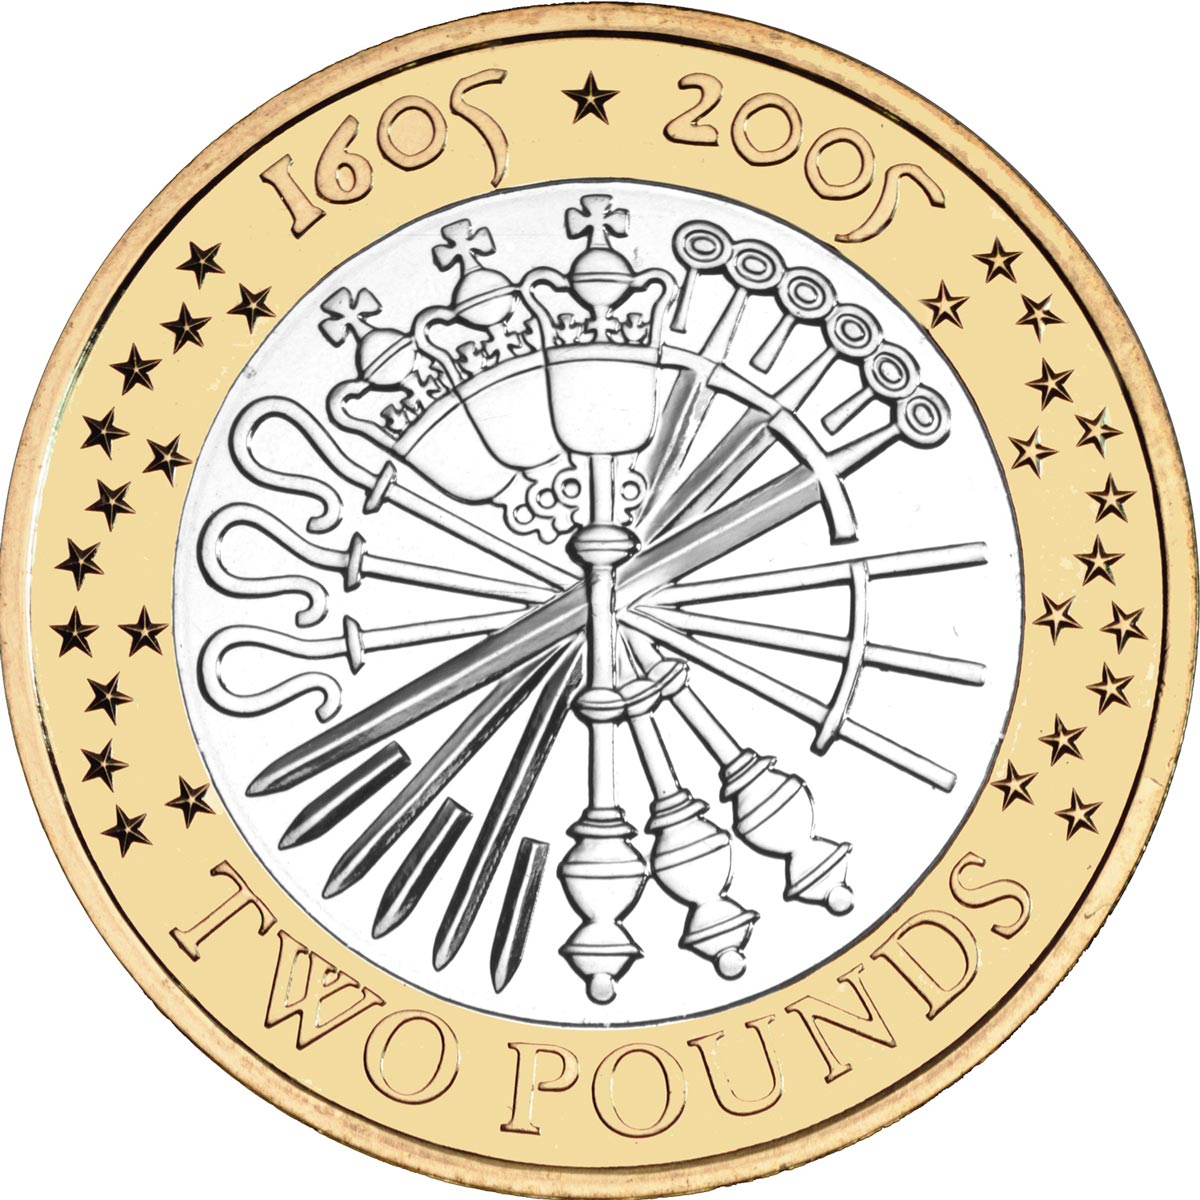 Image of 2 pounds coin - 400th anniversary of the Gunpowder Plot | United Kingdom 2005.  The Bimetal: CuNi, nordic gold coin is of Proof, BU, UNC quality.